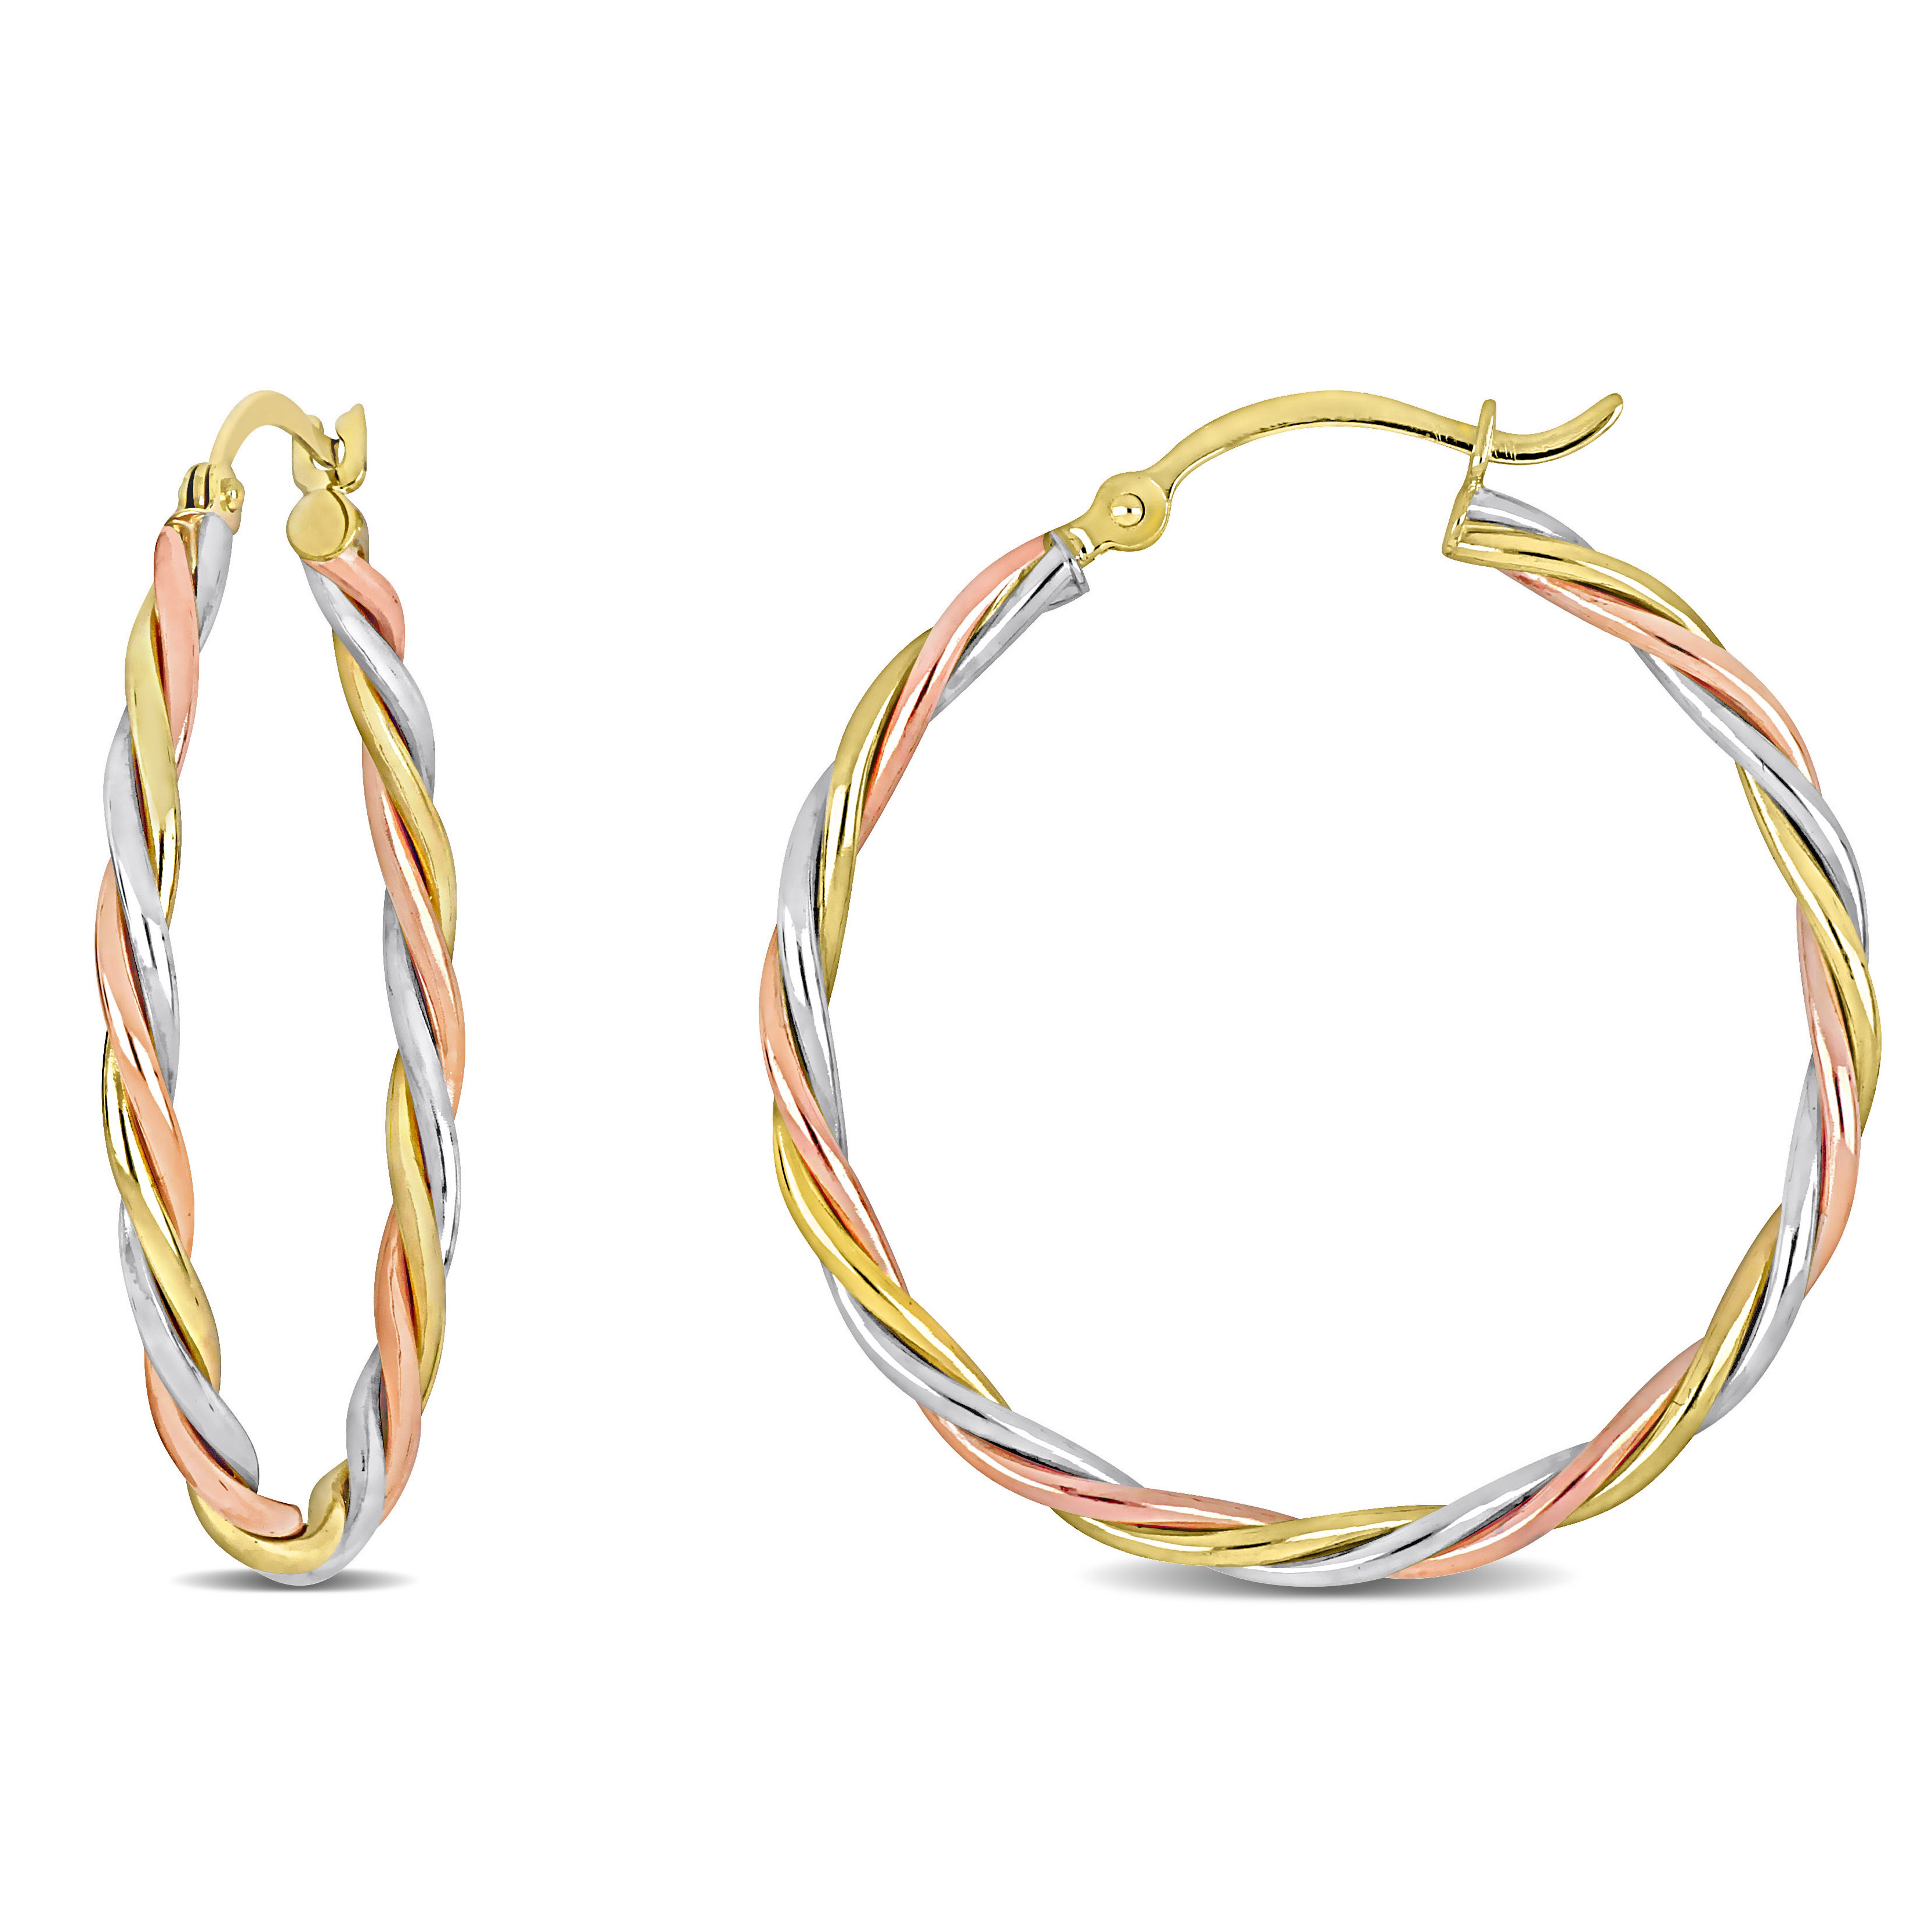 Twisted Hoop Earrings in 3-Tone 10k White, Yellow & Rose Gold